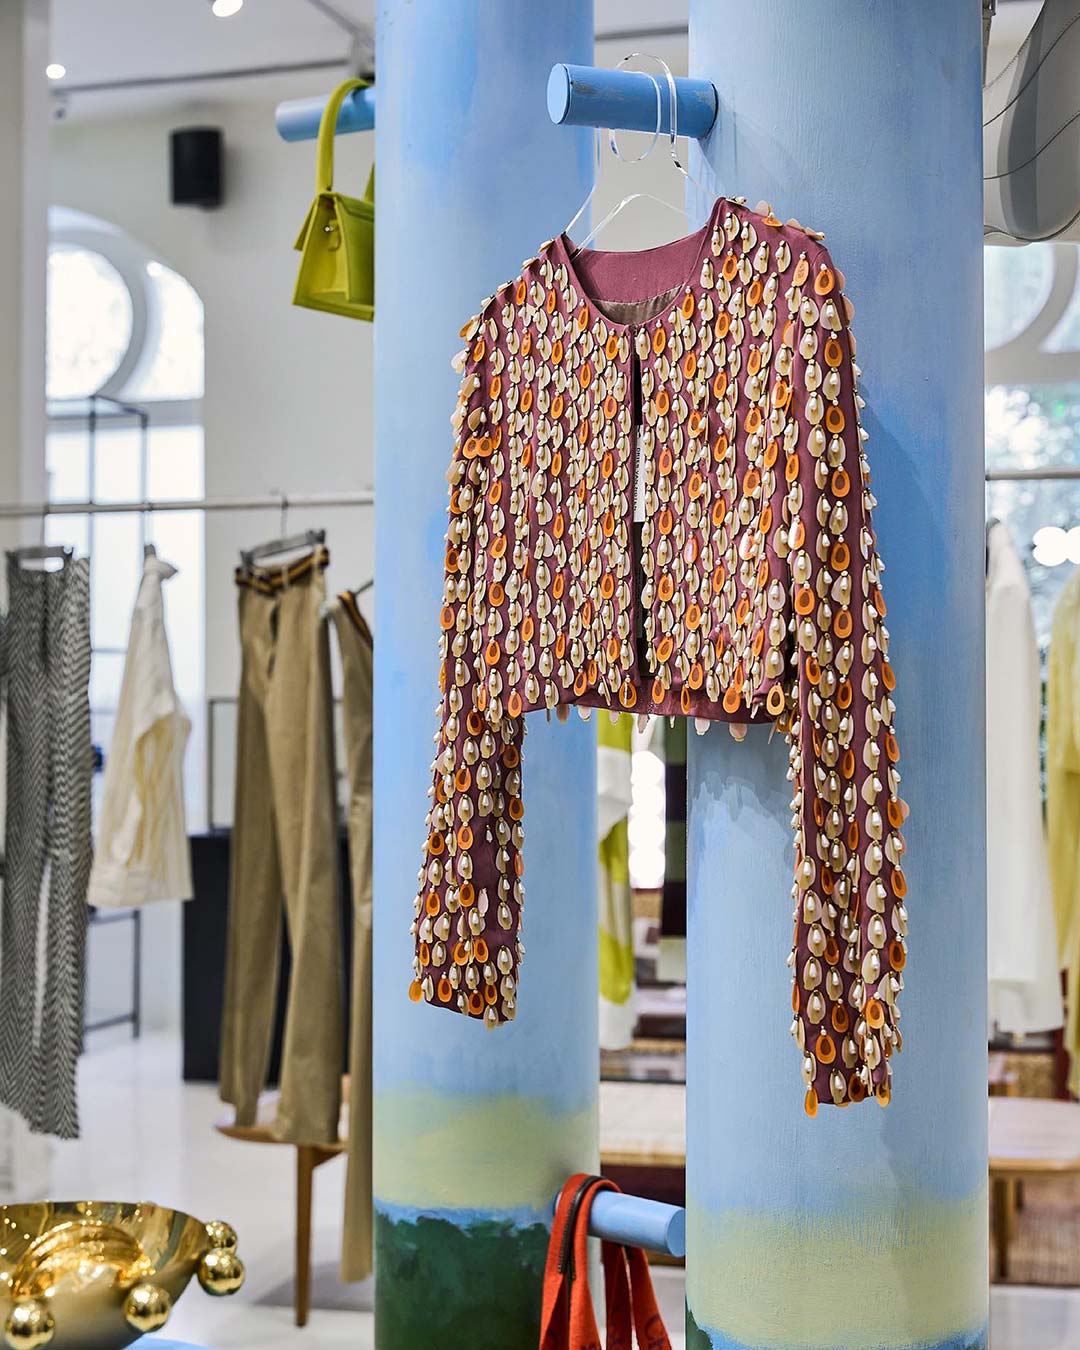 A sequinned jacket hangs on a blue pillar inside Le Mill boutique in Mumbai.